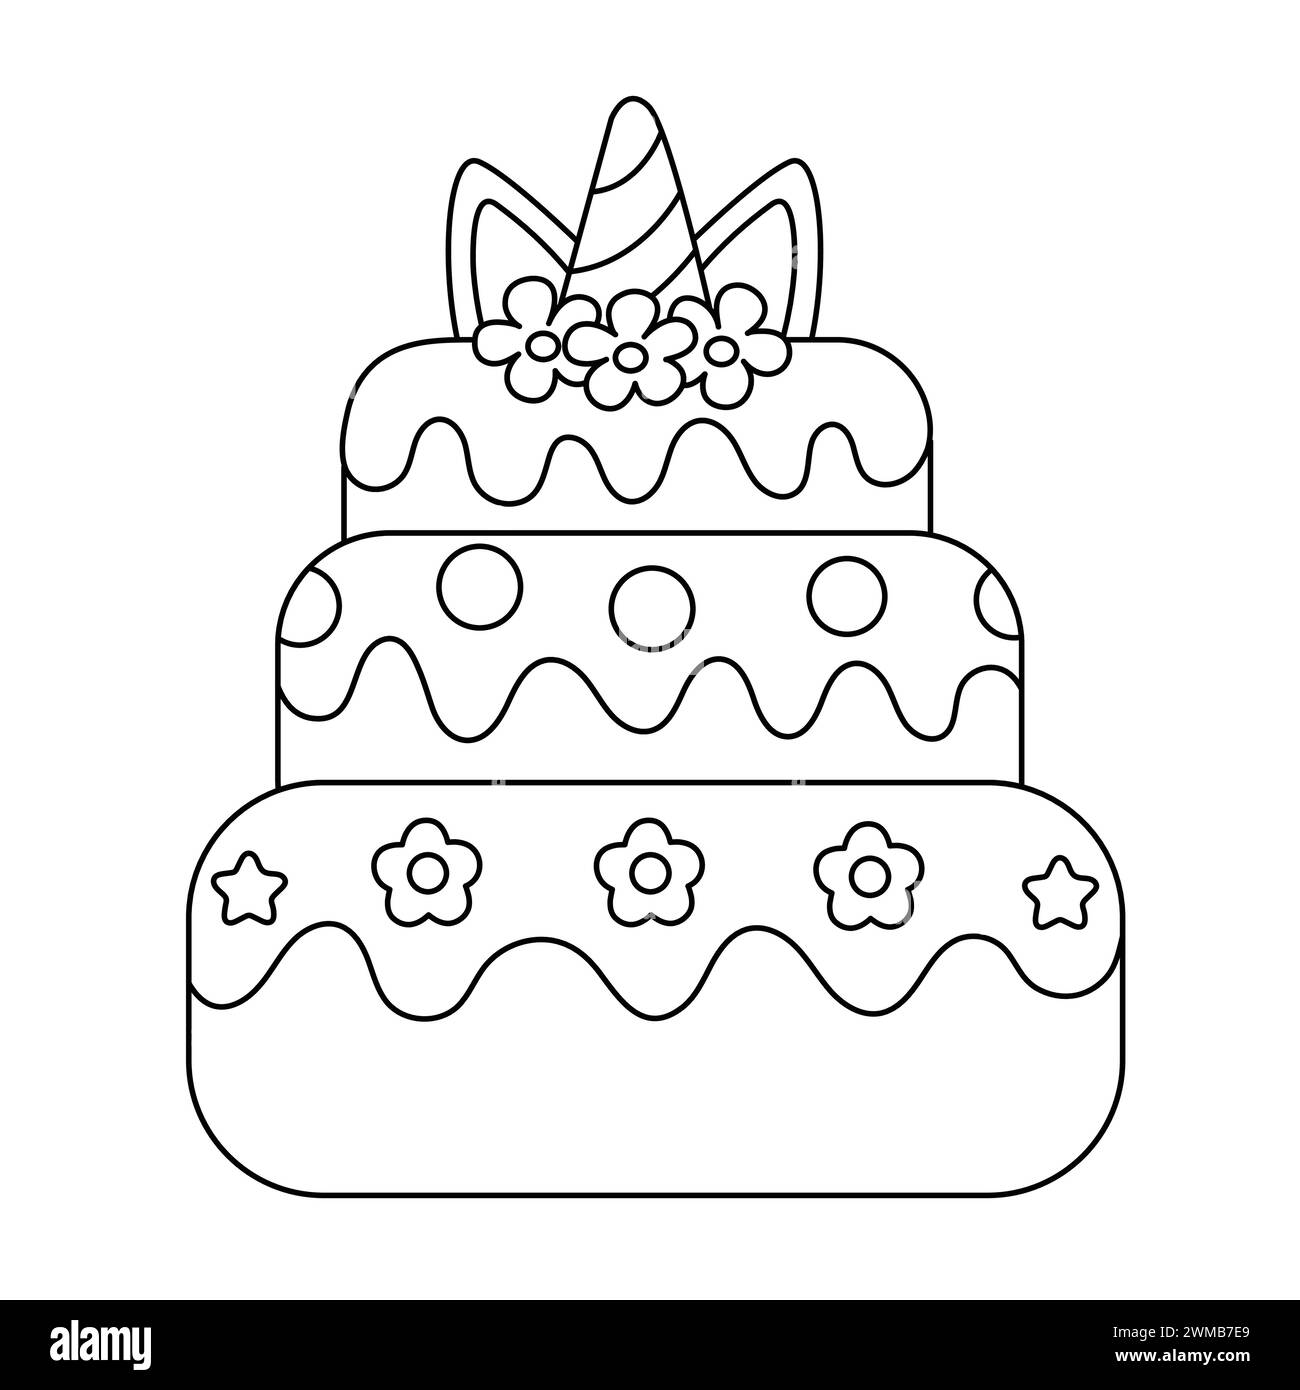 Unicorn Cake Coloring Page. Coloring Cartoon Birthday Cake With Candles. Desserts Coloring Book Illustration. Doodle Style. Cake Decoration Stock Vector